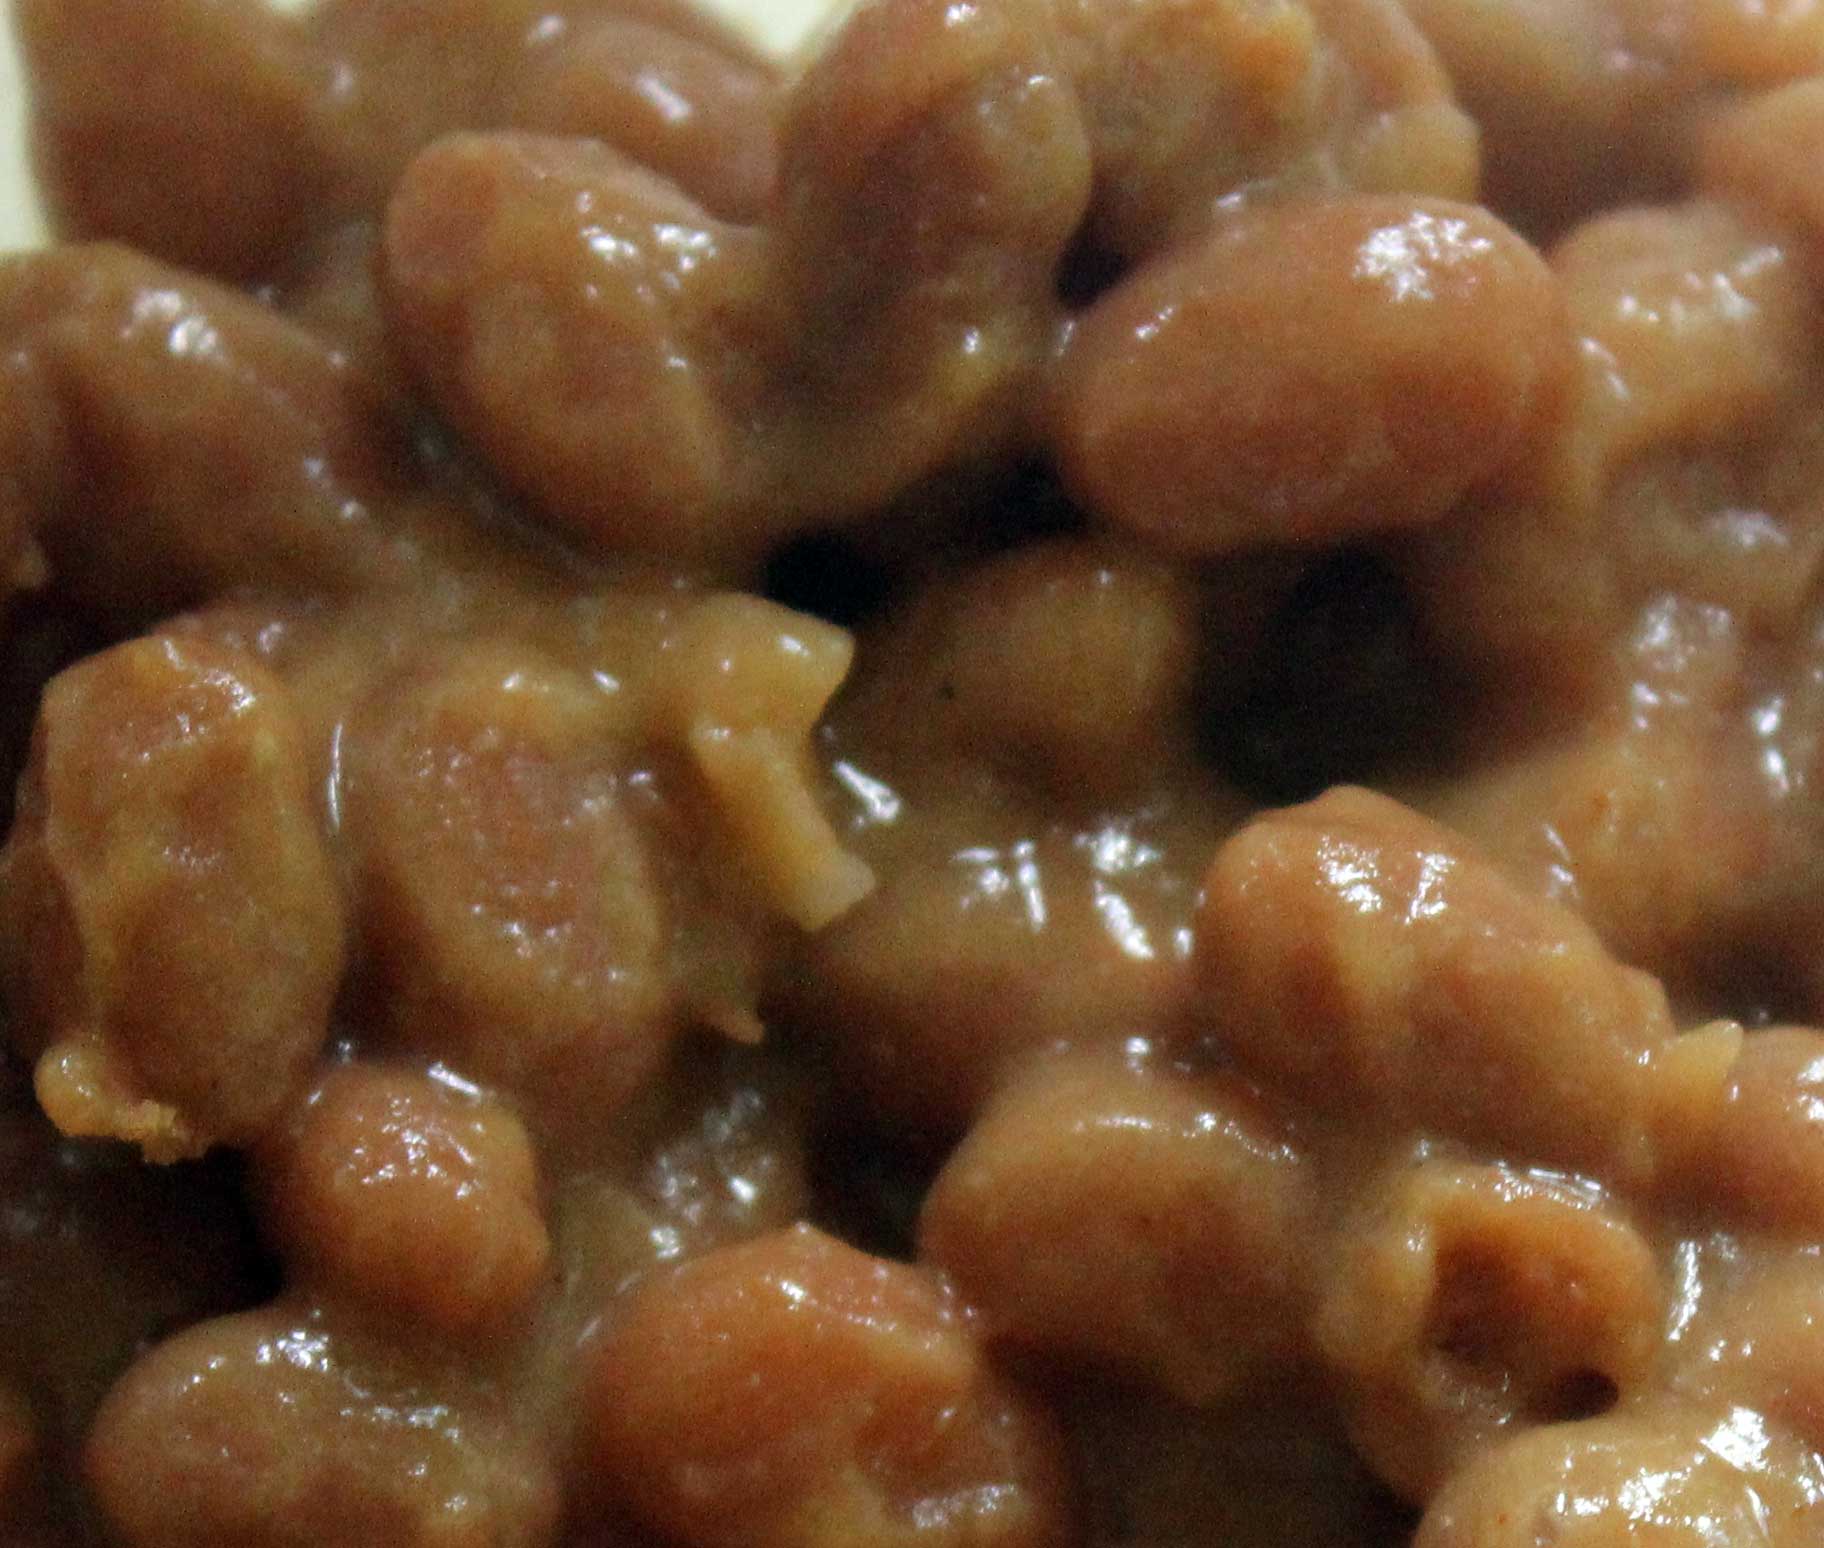 TBT Recipe: Virgil’s Hickory Pit Baked Beans